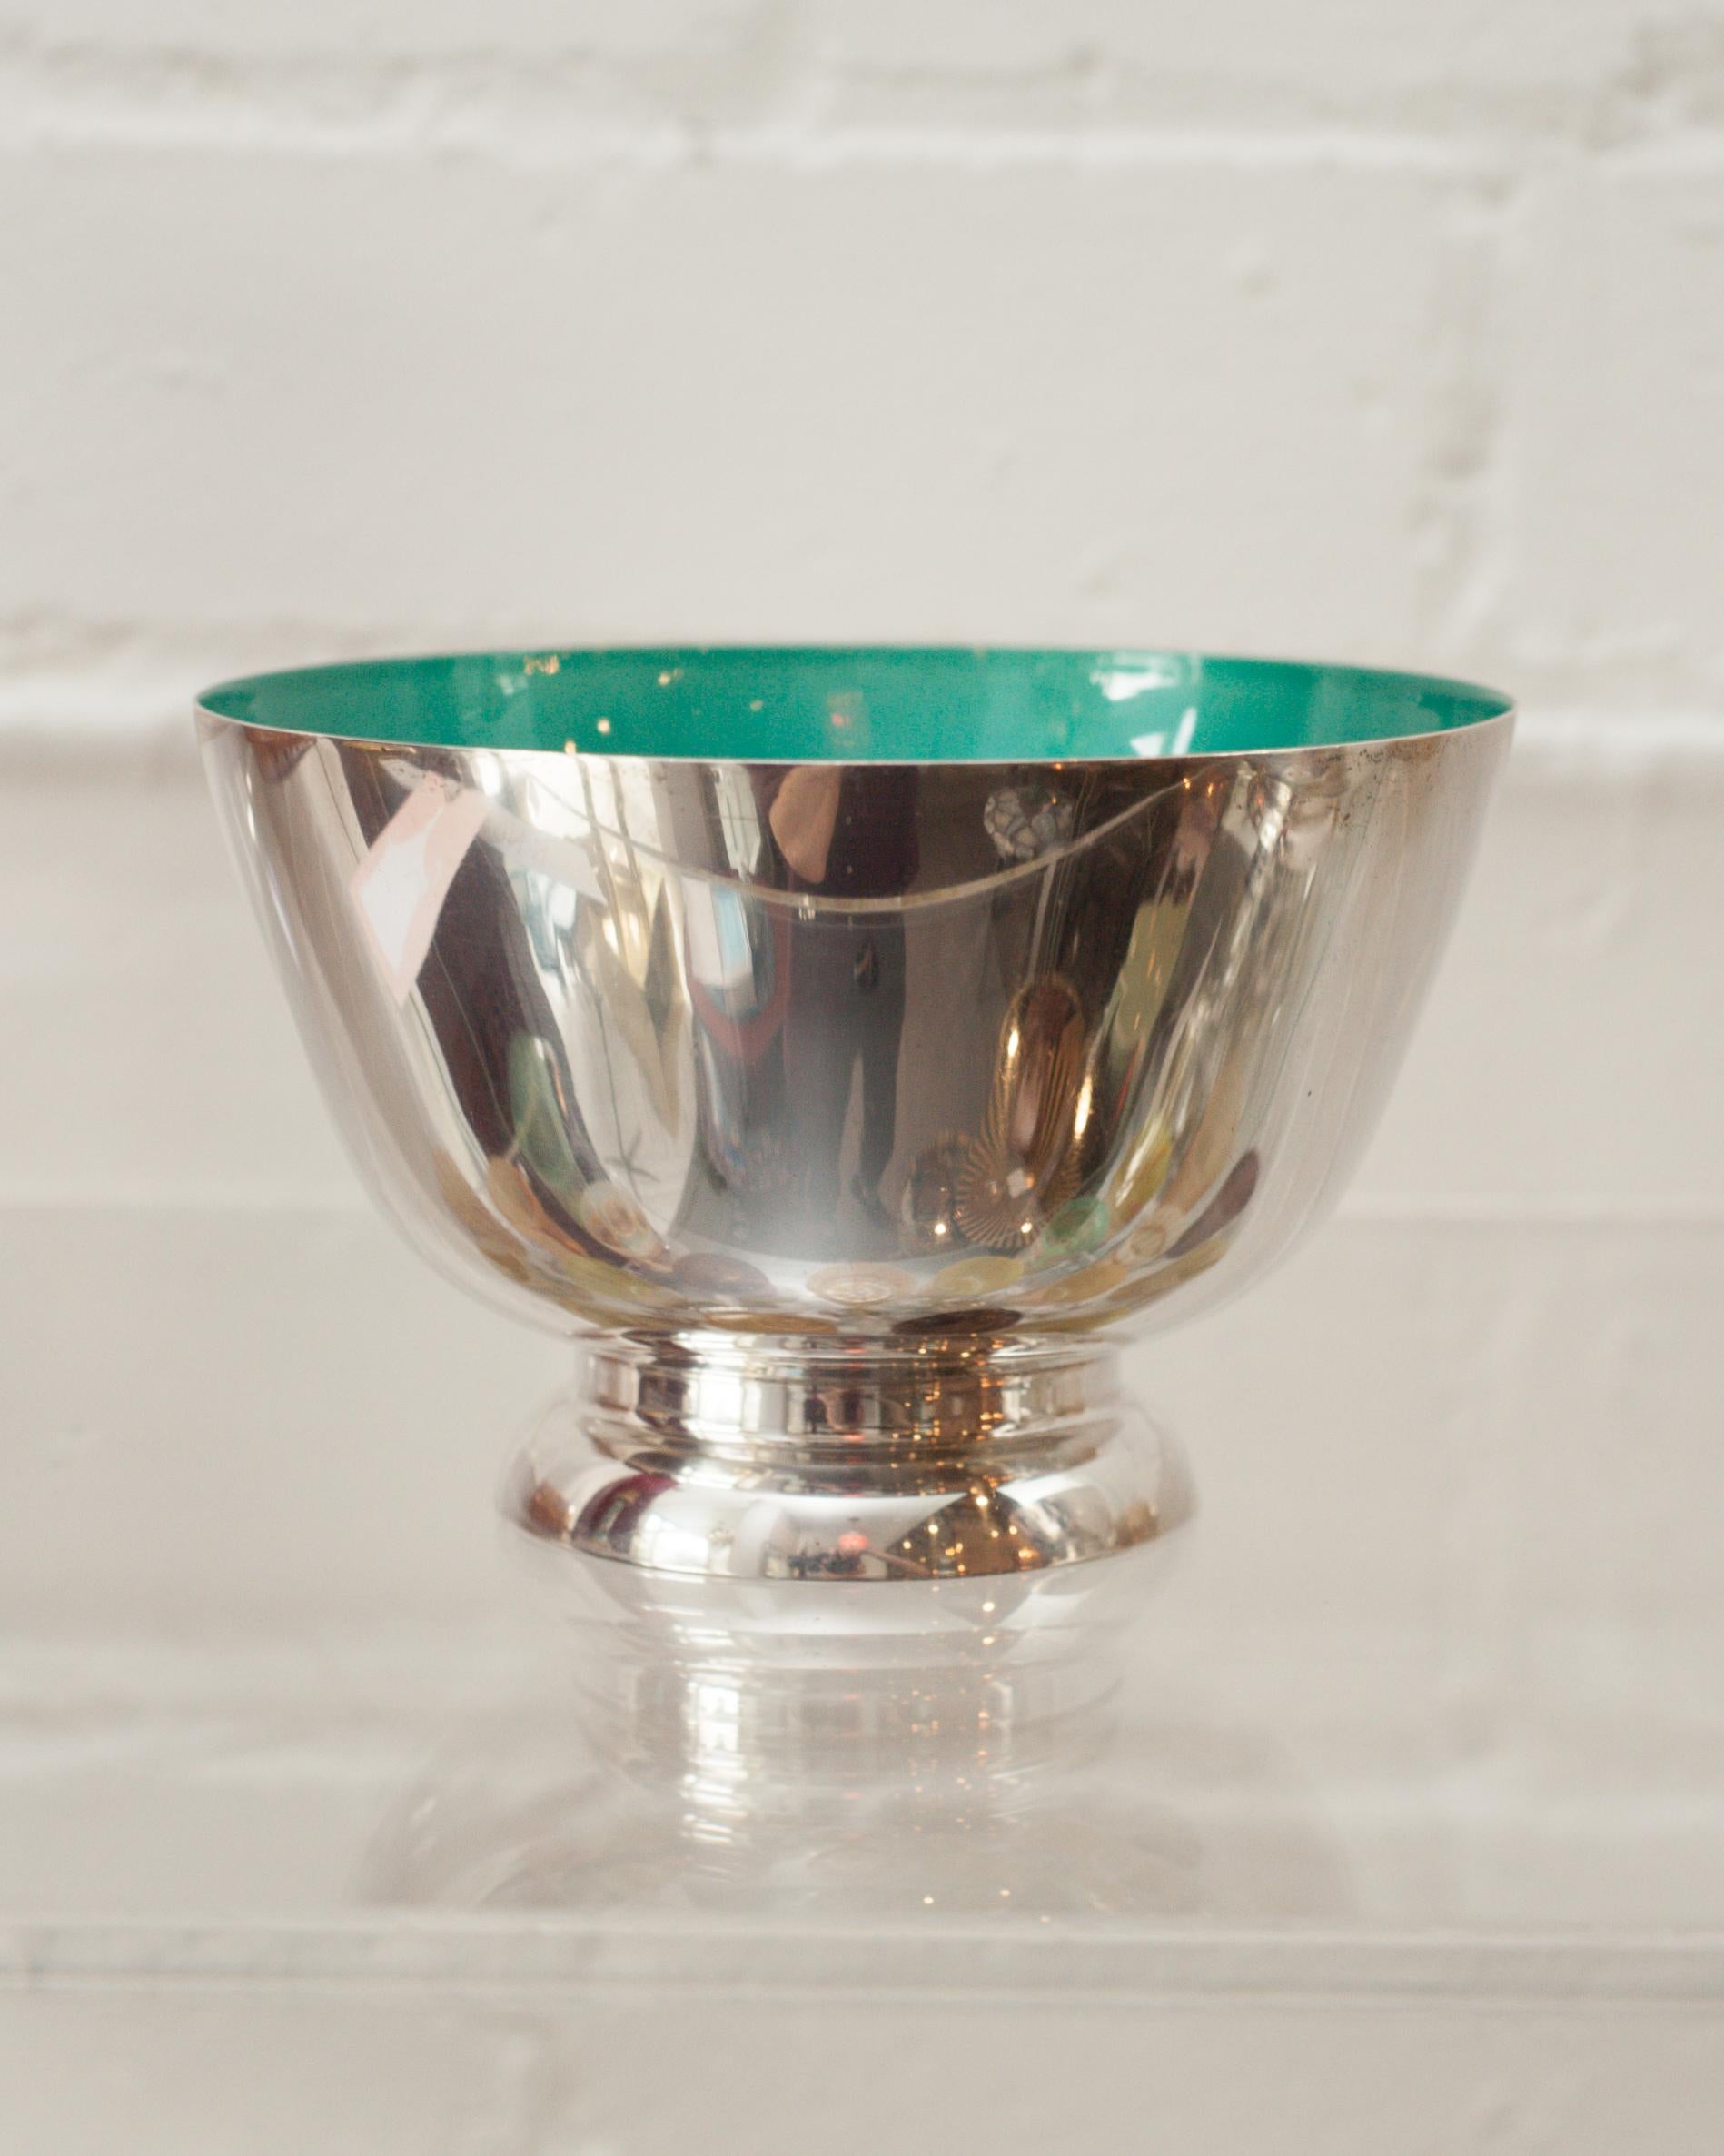 A beautiful mid-century sterling silver bowl with turquoise blue enamel lining. This Revere style bowl is perfect for fruits, candies, nuts. Due to the vibrant interior colour, this vessel is a beautiful empty as filled.